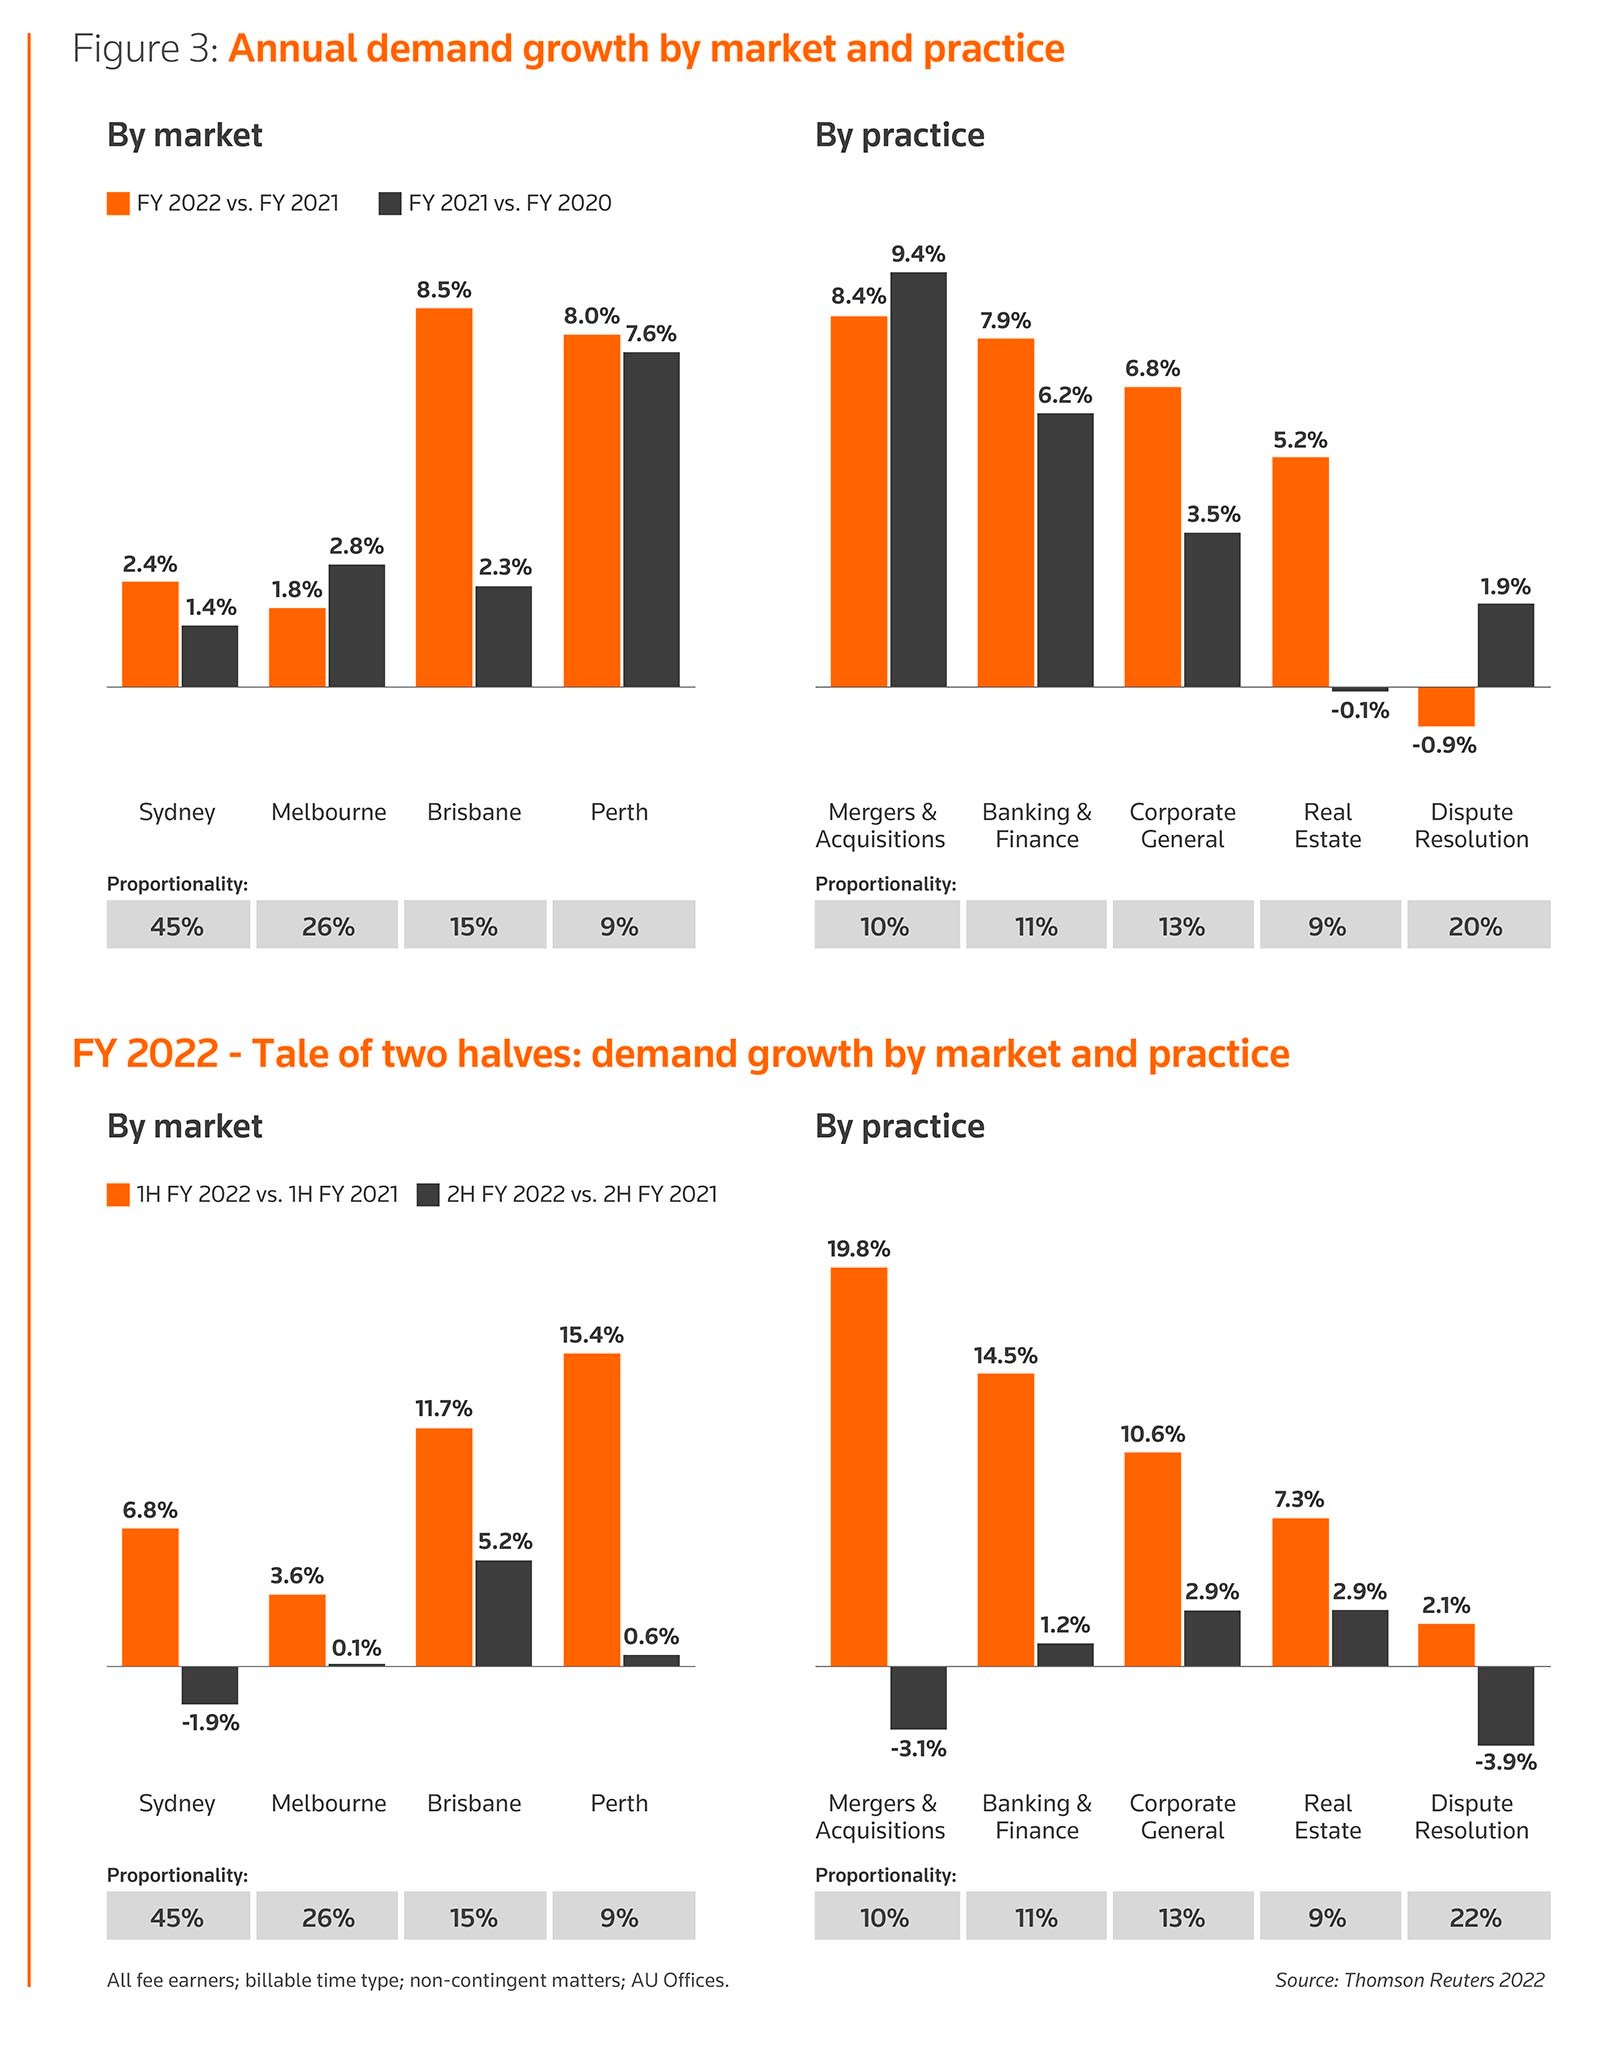 Annual demand growth by market and practice